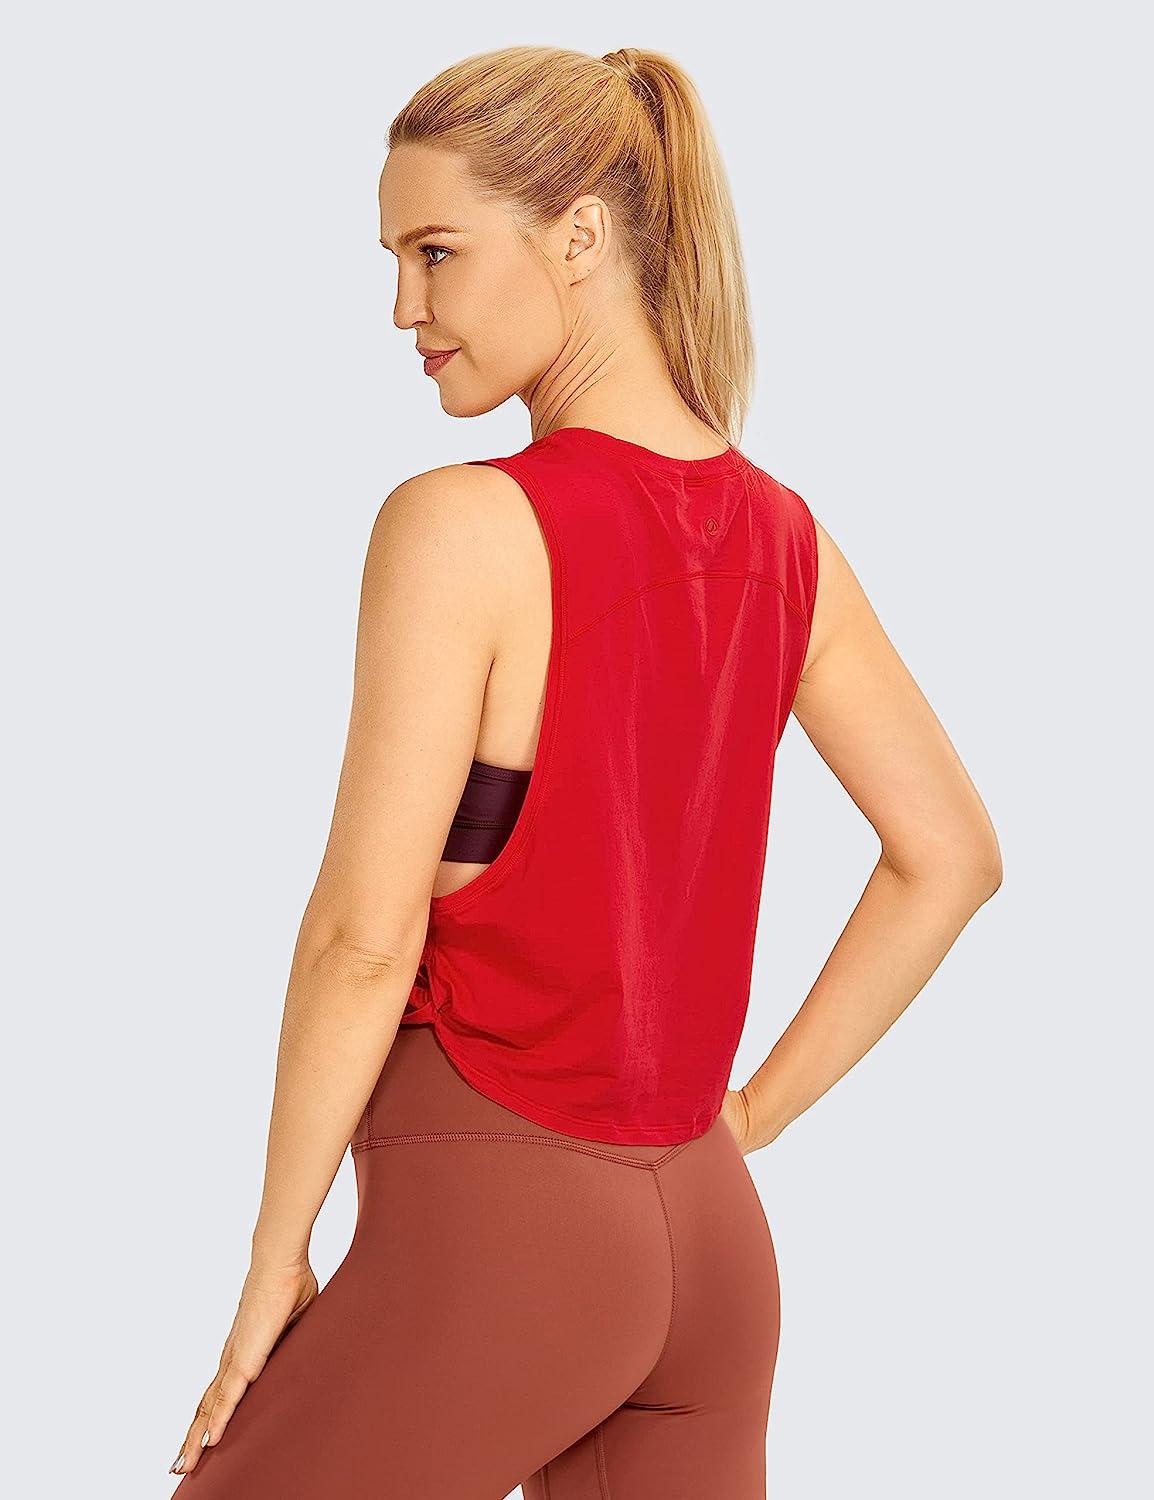 CRZ YOGA Pima Cotton Cropped Tank Tops for Women - Sleeveless Sports Shirts  Athletic Yoga Running Gym Workout Crop Tops Medium Deep Armhole-festival Red